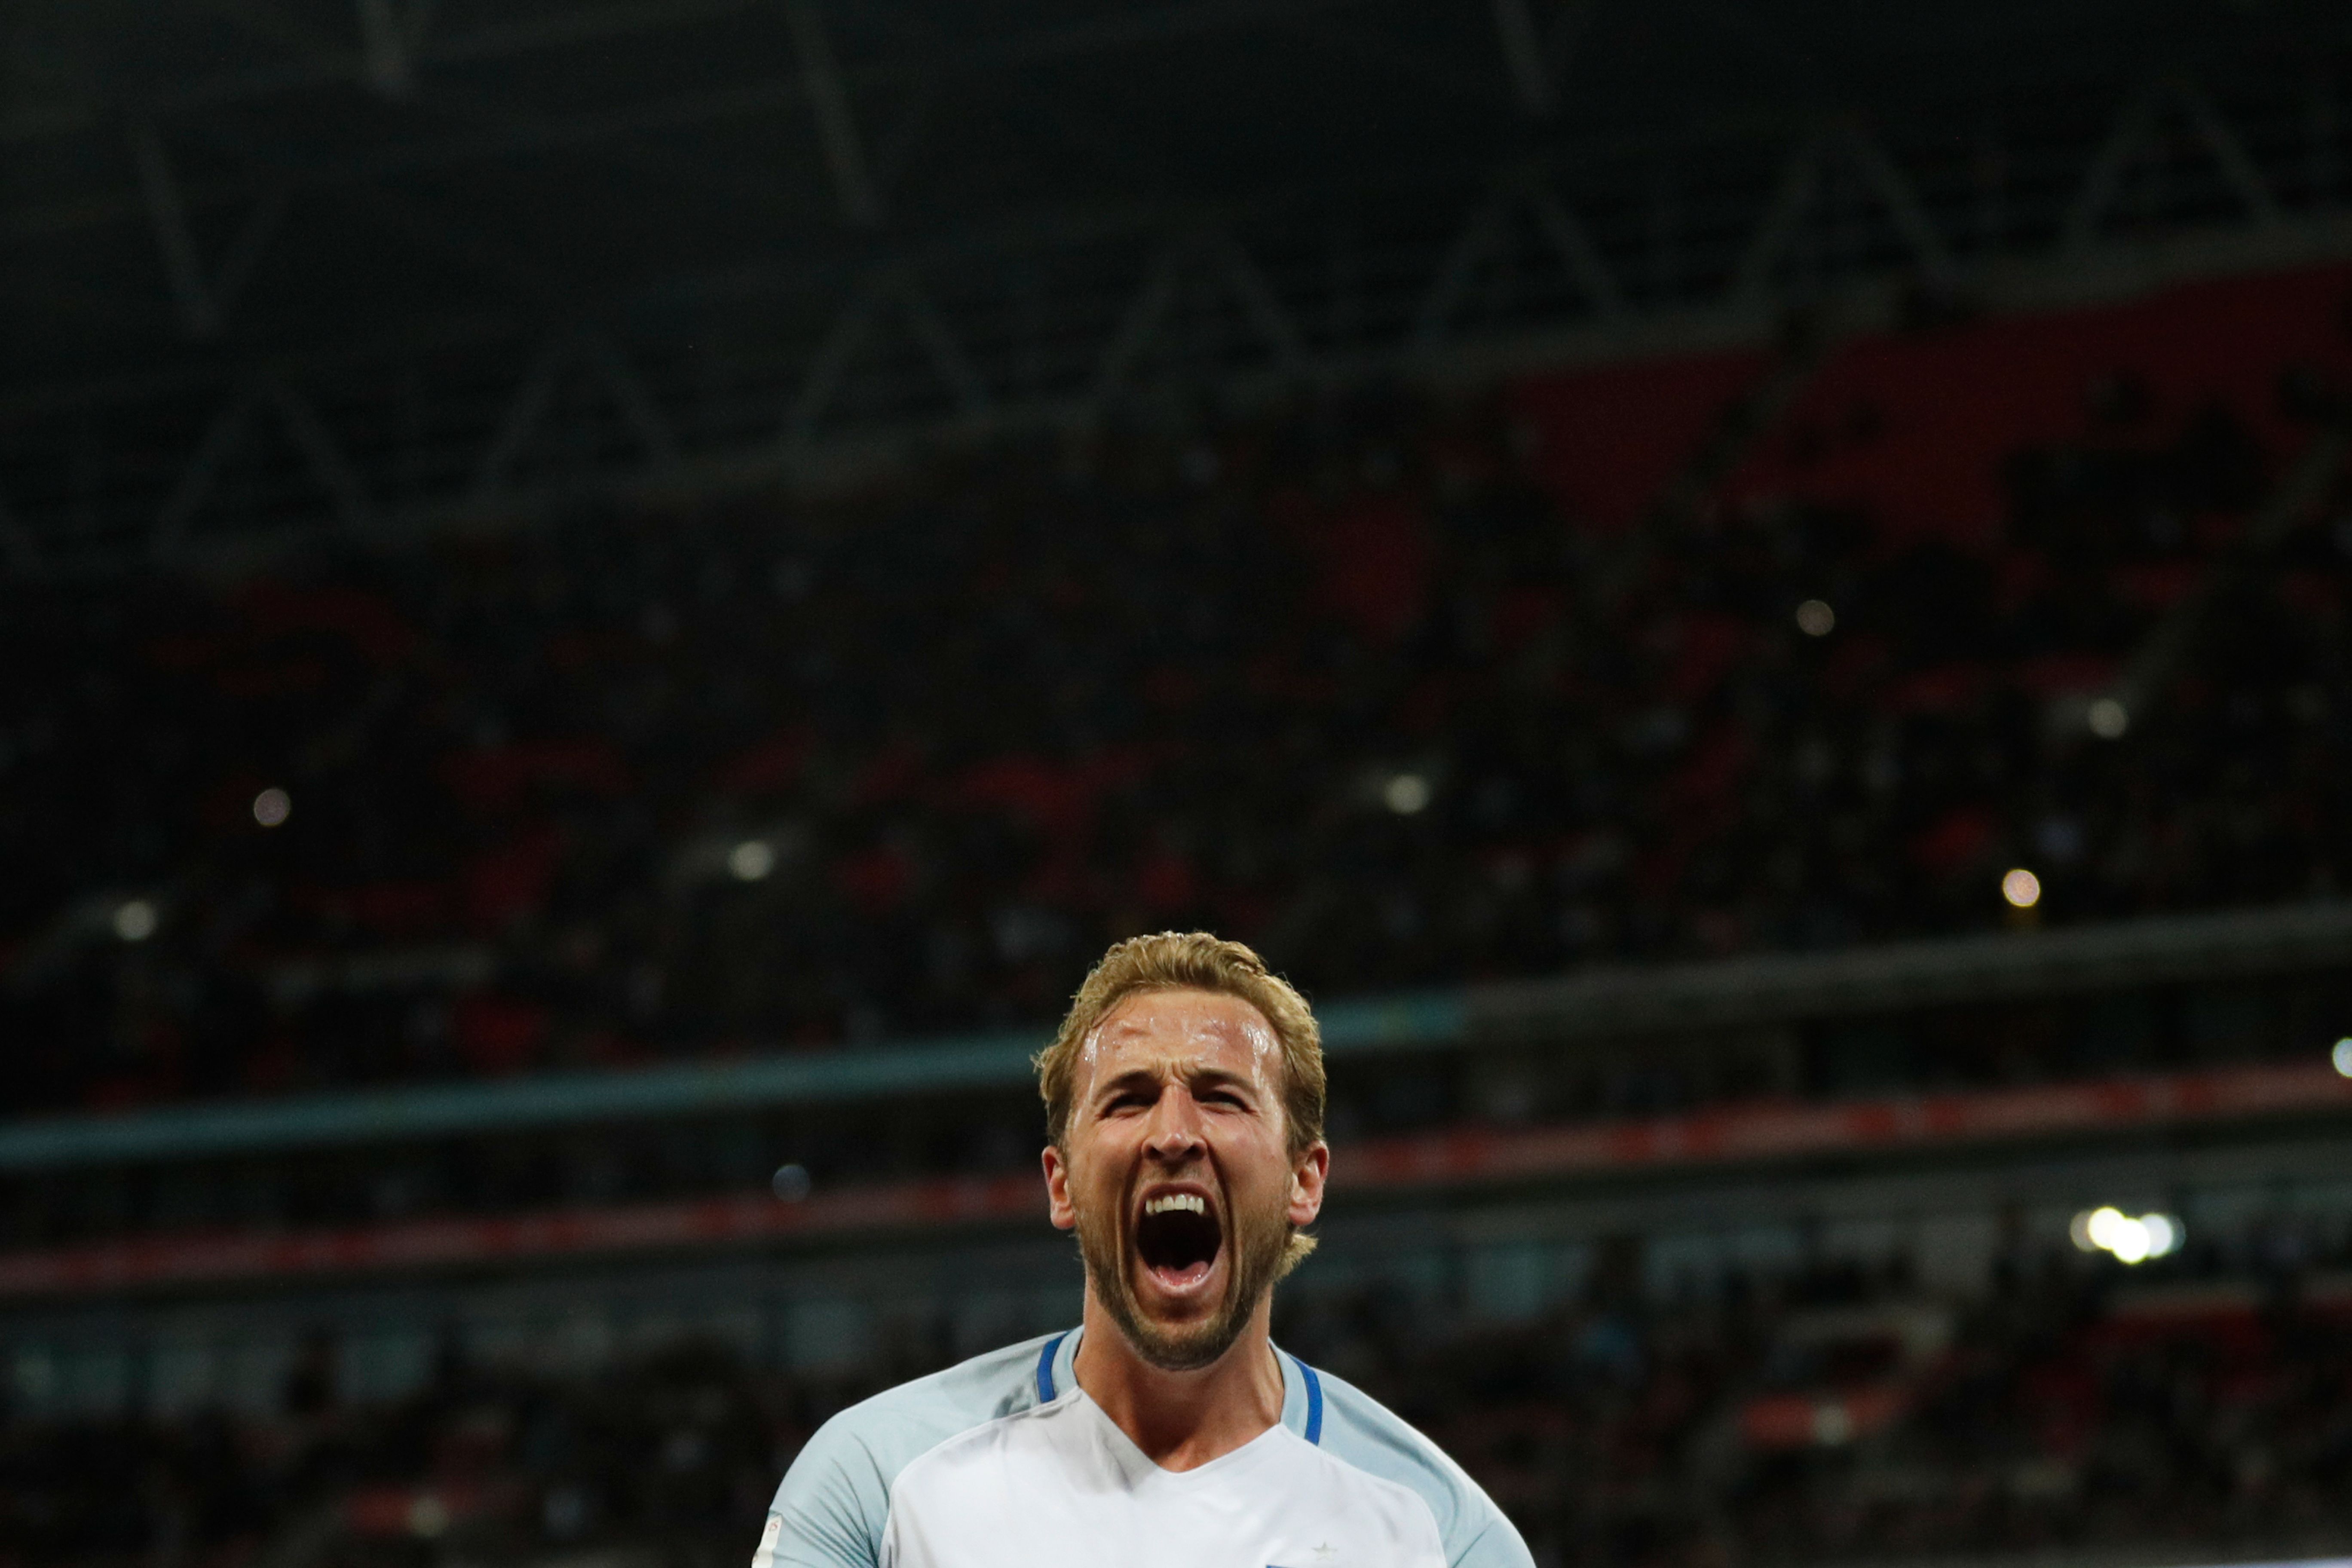 England's striker Harry Kane celebrates scoring the opening goal during the FIFA World Cup 2018 qualification football match between England and Slovenia at Wembley Stadium in London on October 5, 2017.  / AFP PHOTO / Adrian DENNIS / NOT FOR MARKETING OR ADVERTISING USE / RESTRICTED TO EDITORIAL USE        (Photo credit should read ADRIAN DENNIS/AFP/Getty Images)